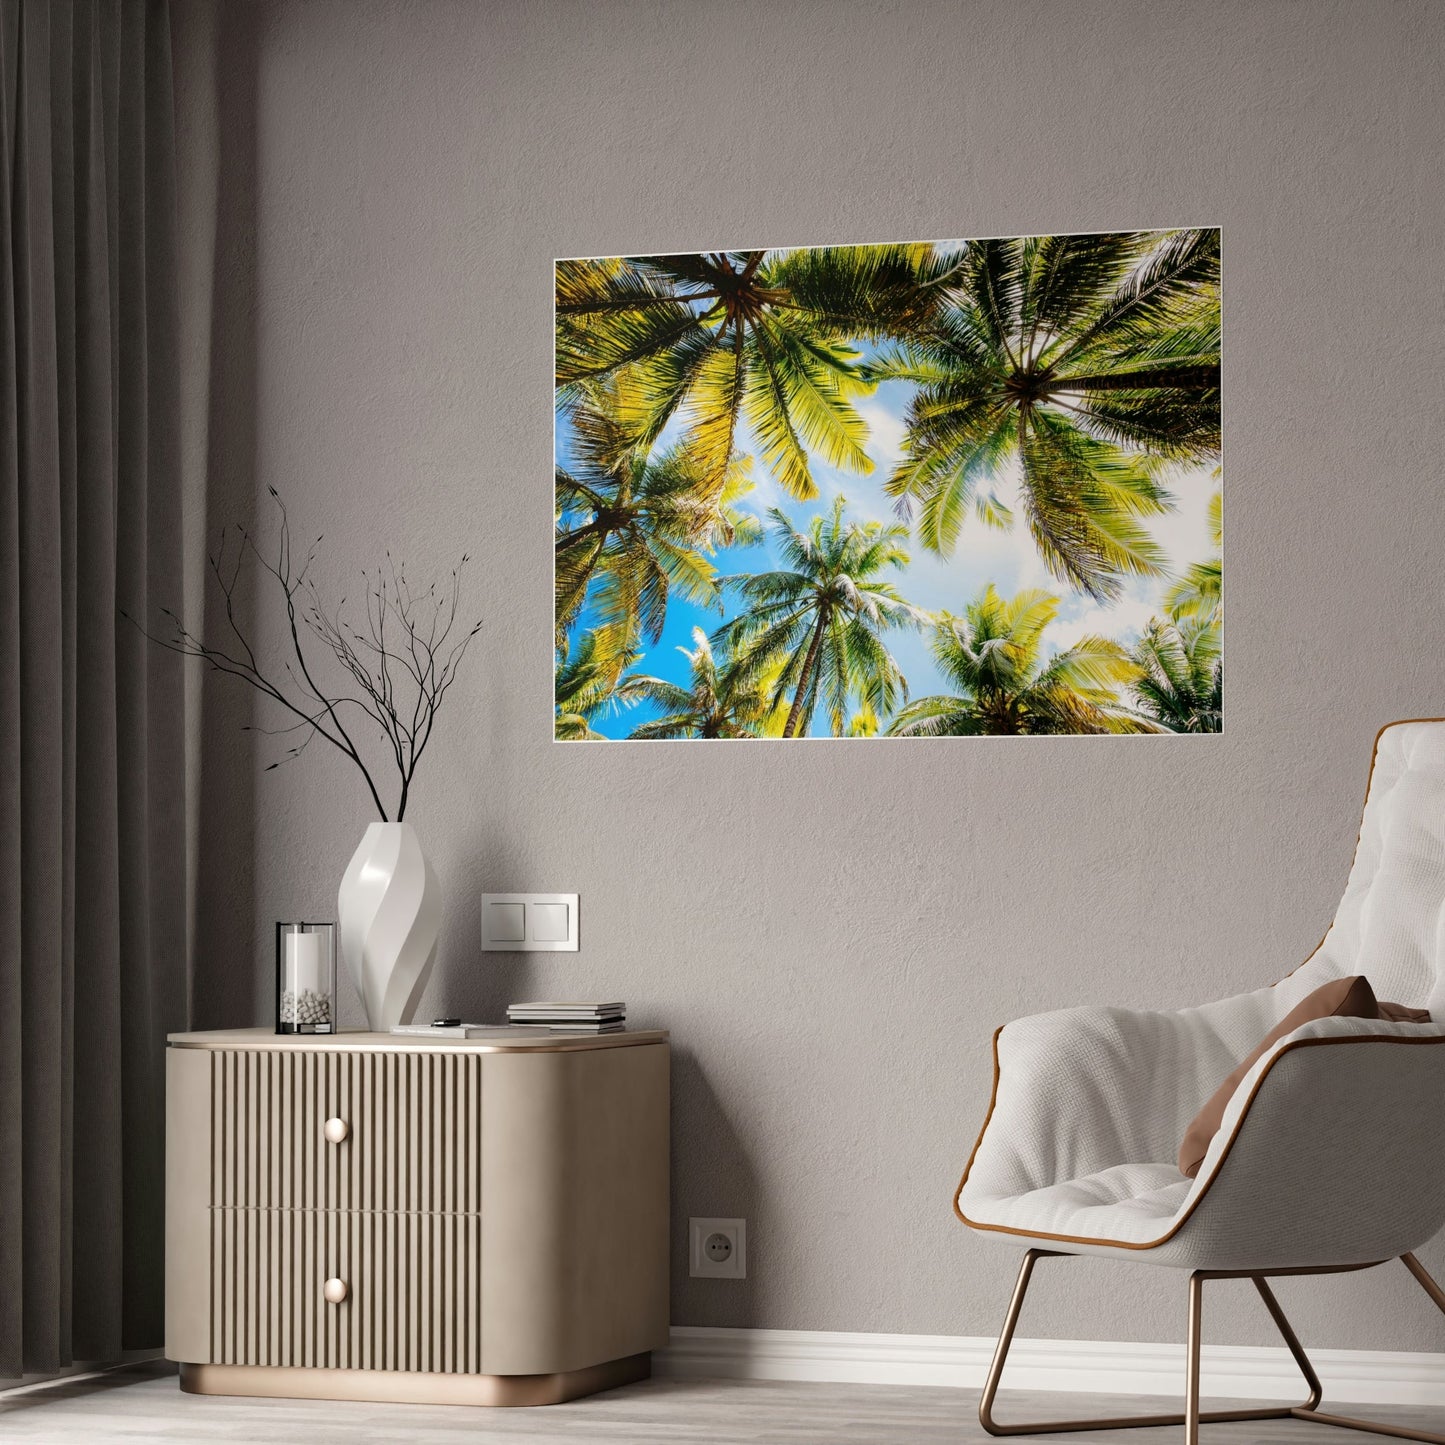 Soothing Palms: Relaxing Wall Art of Palm Trees Swaying in the Breeze